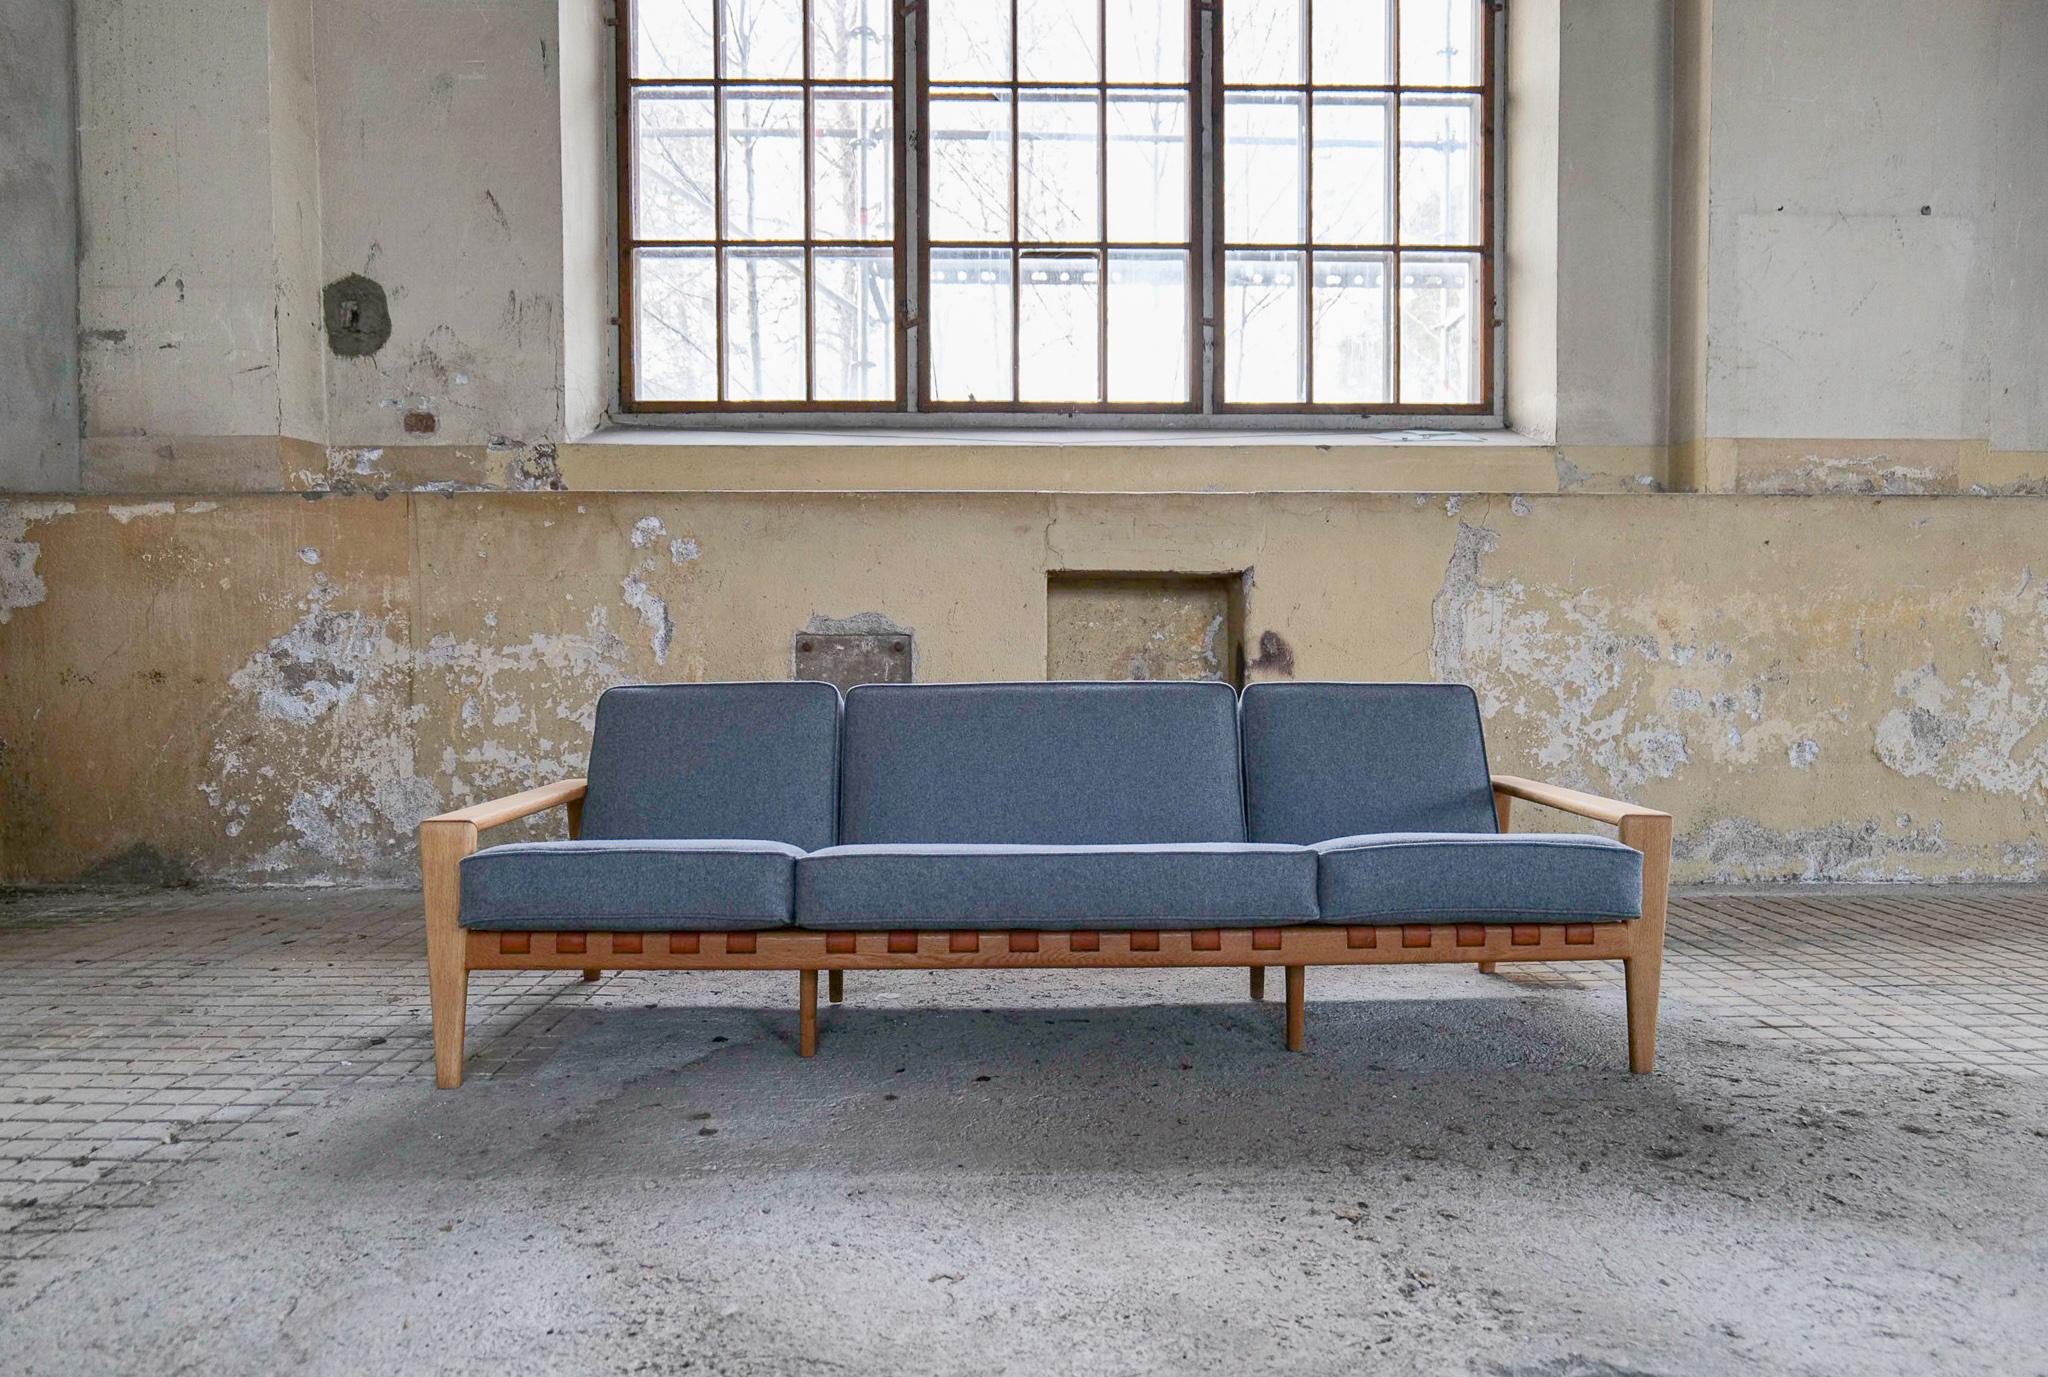 Made in the heart of Sweden at AB Hjertquist & Co, Nässjö and designed by Svante Skogh in Sweden, 1960s.
This sizeable sofa is made with an solid oak frame, together with the leather webbing the stunning and unique look is a fact. This one with all